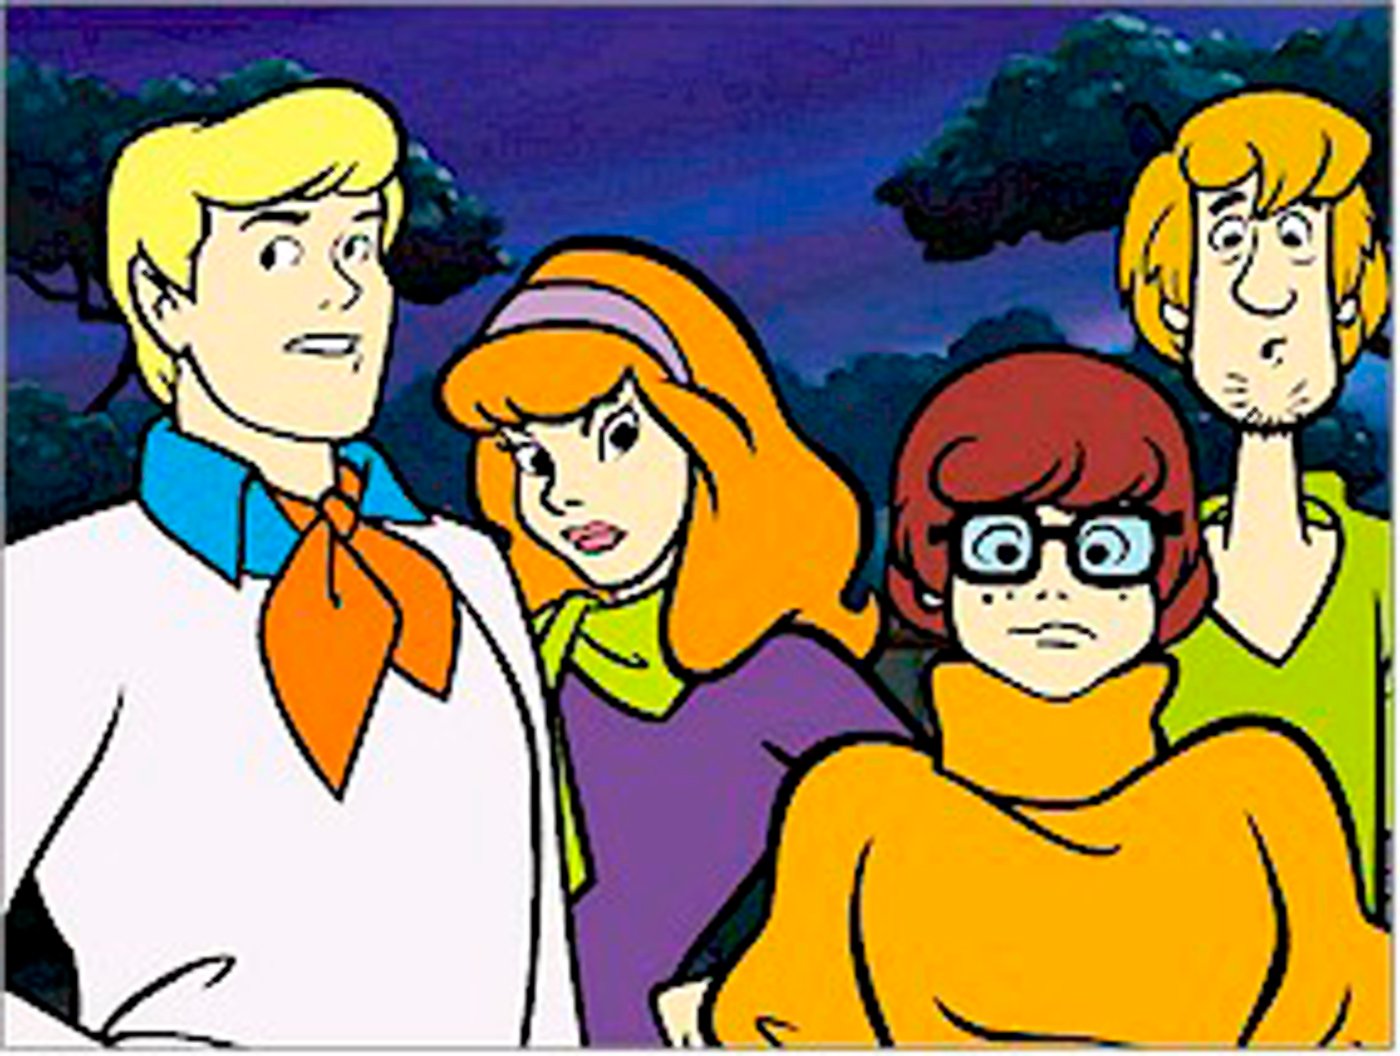 These Actors Star In The New ‘Scooby-Doo’ Movie